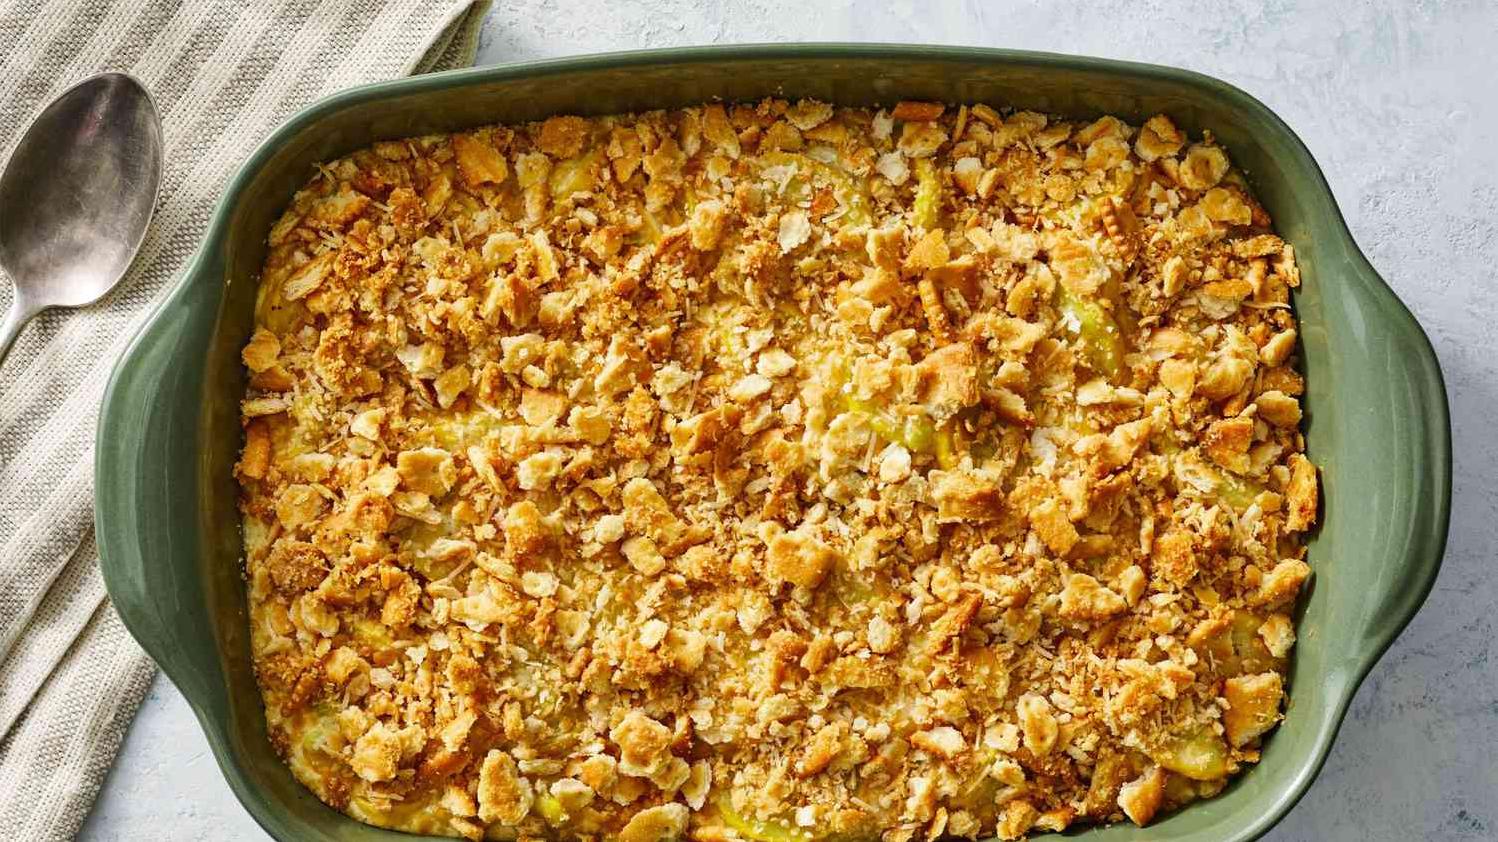  Melt-in-your-mouth cheesy goodness with a crunchy breadcrumb topping.